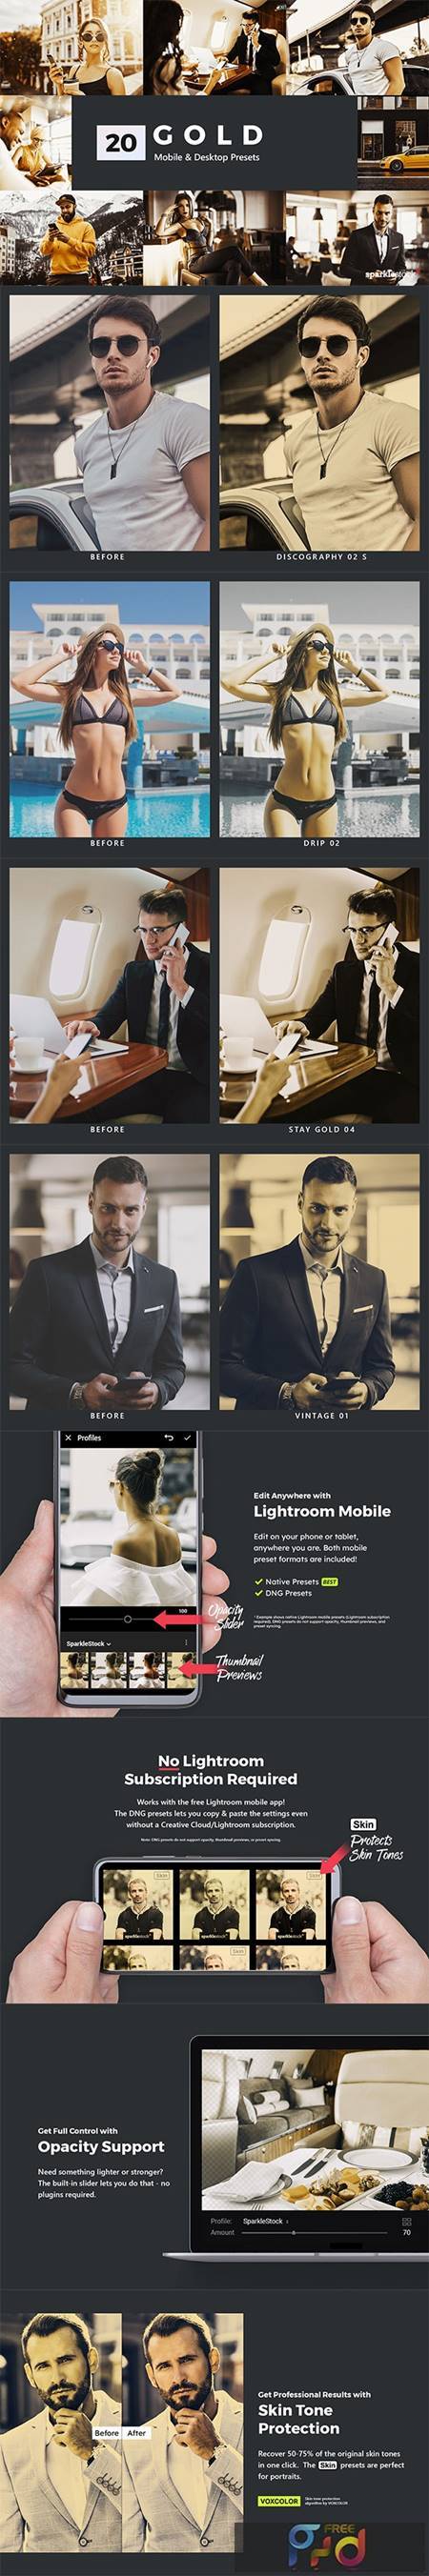 20 Gold Lightroom Presets and LUTs 27986347 1